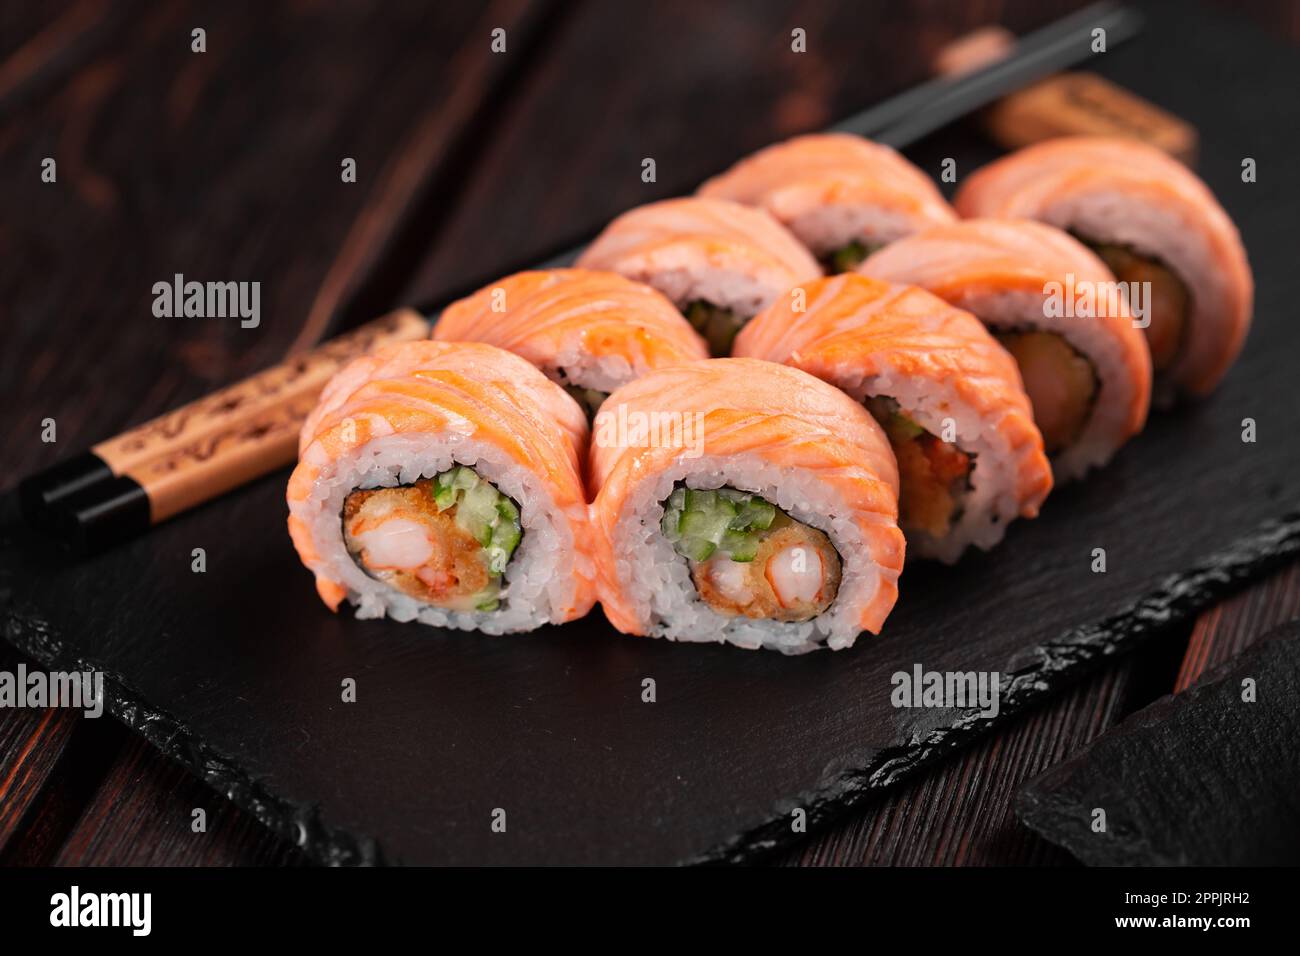 https://c8.alamy.com/comp/2PPJRH2/sushi-roll-philadelphia-with-crab-and-cucumber-and-cream-cheese-caviar-on-black-background-close-up-sushi-menu-japanese-food-concept-2PPJRH2.jpg